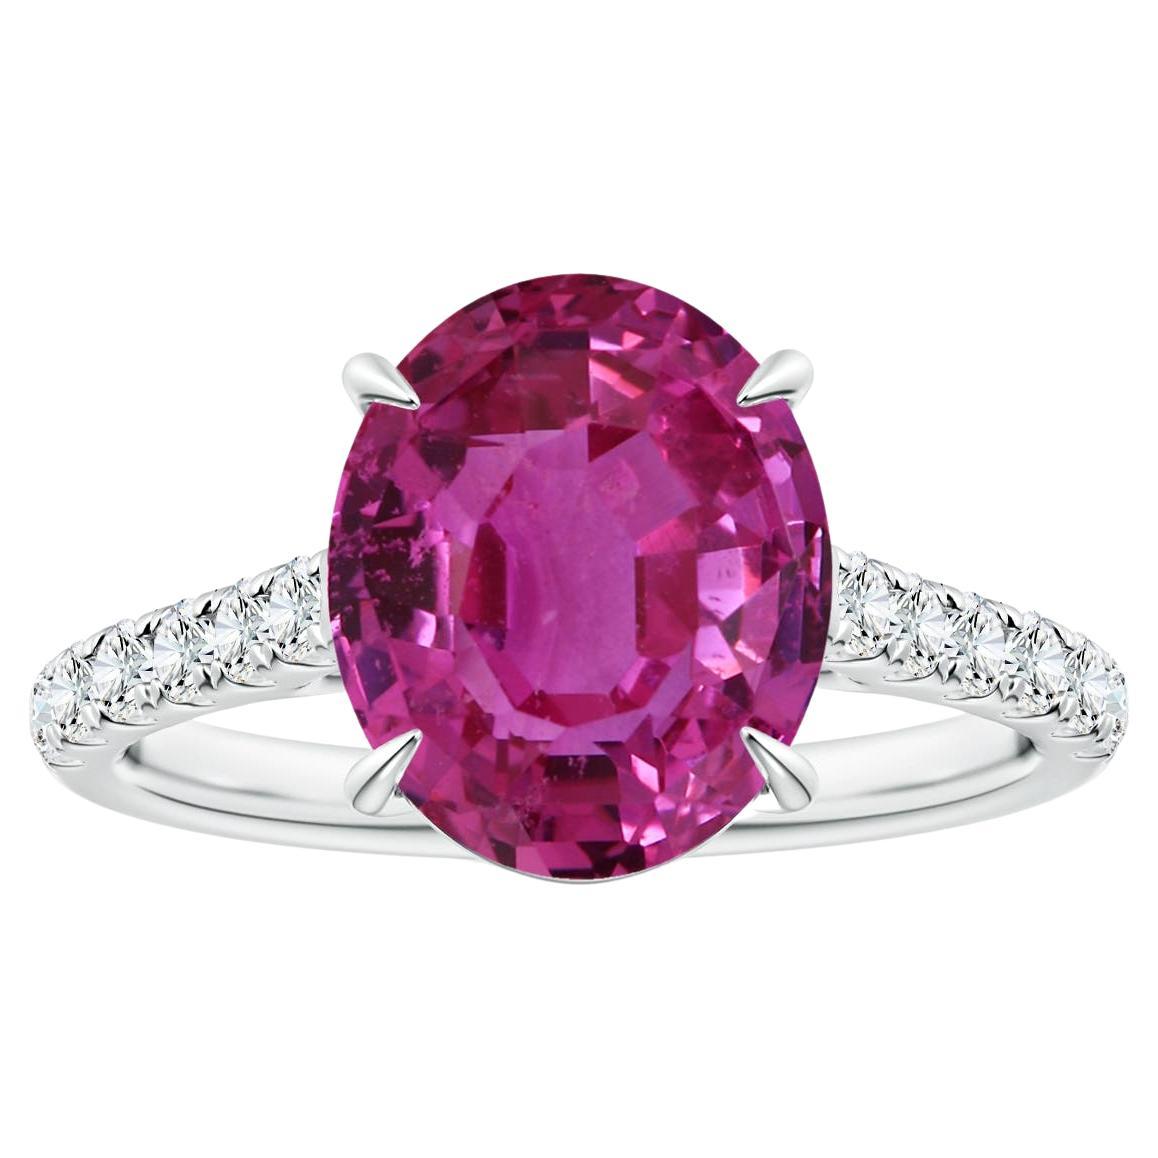 For Sale:  ANGARA Claw-Set GIA Certified Oval Pink Sapphire White Gold Ring with Diamonds